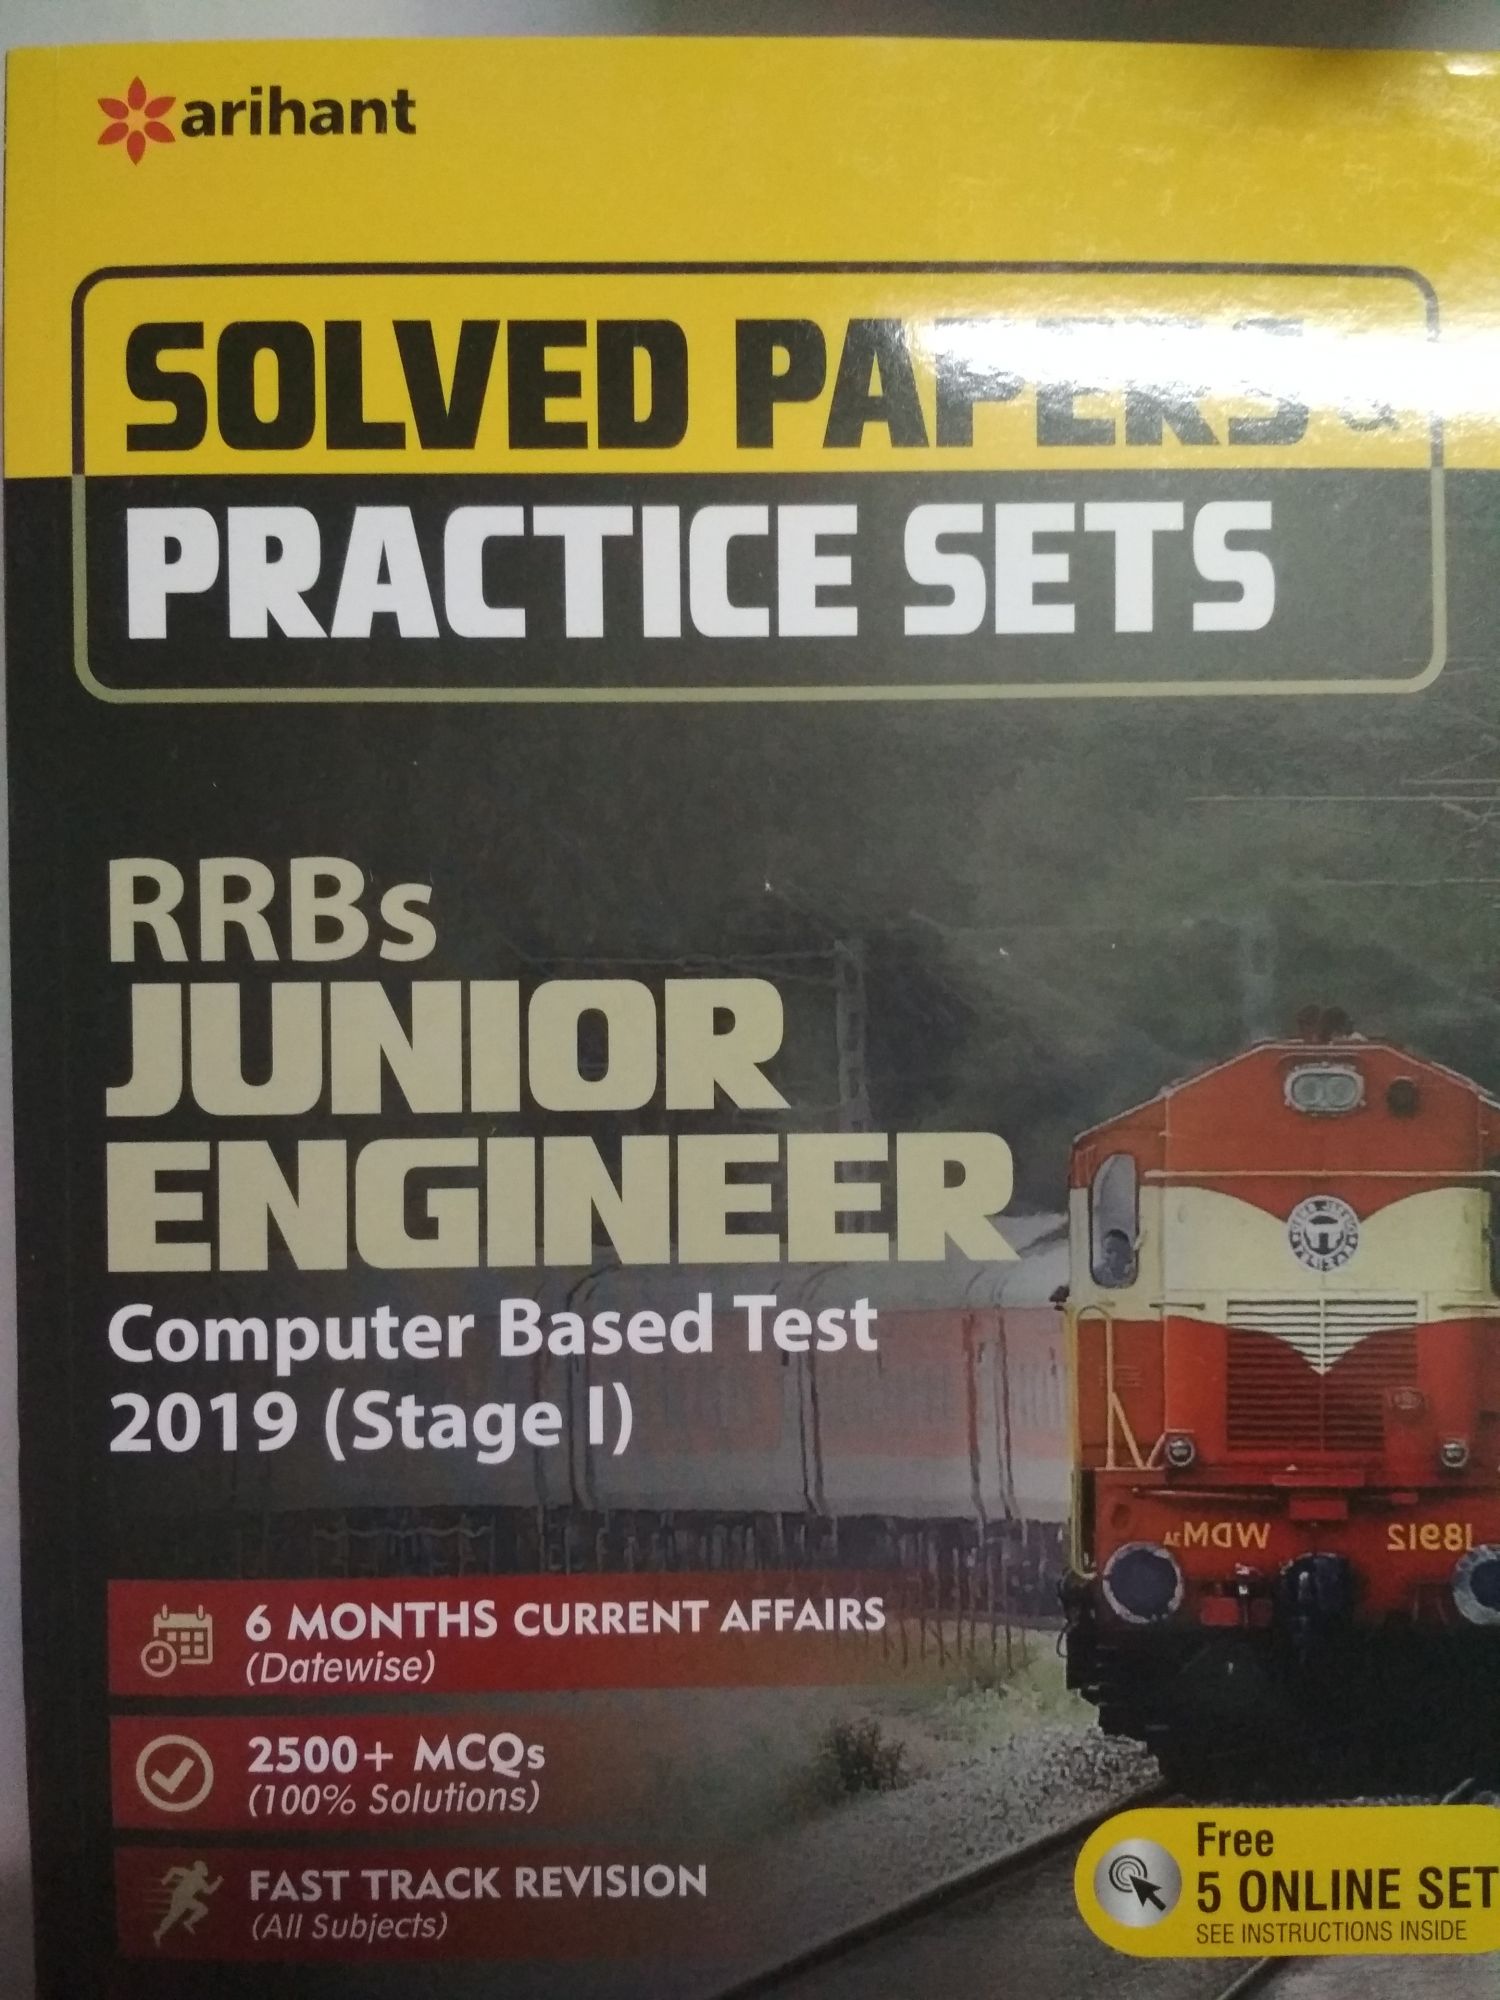 Adihant RRB junior Engineer Solved Paper Practice Sets